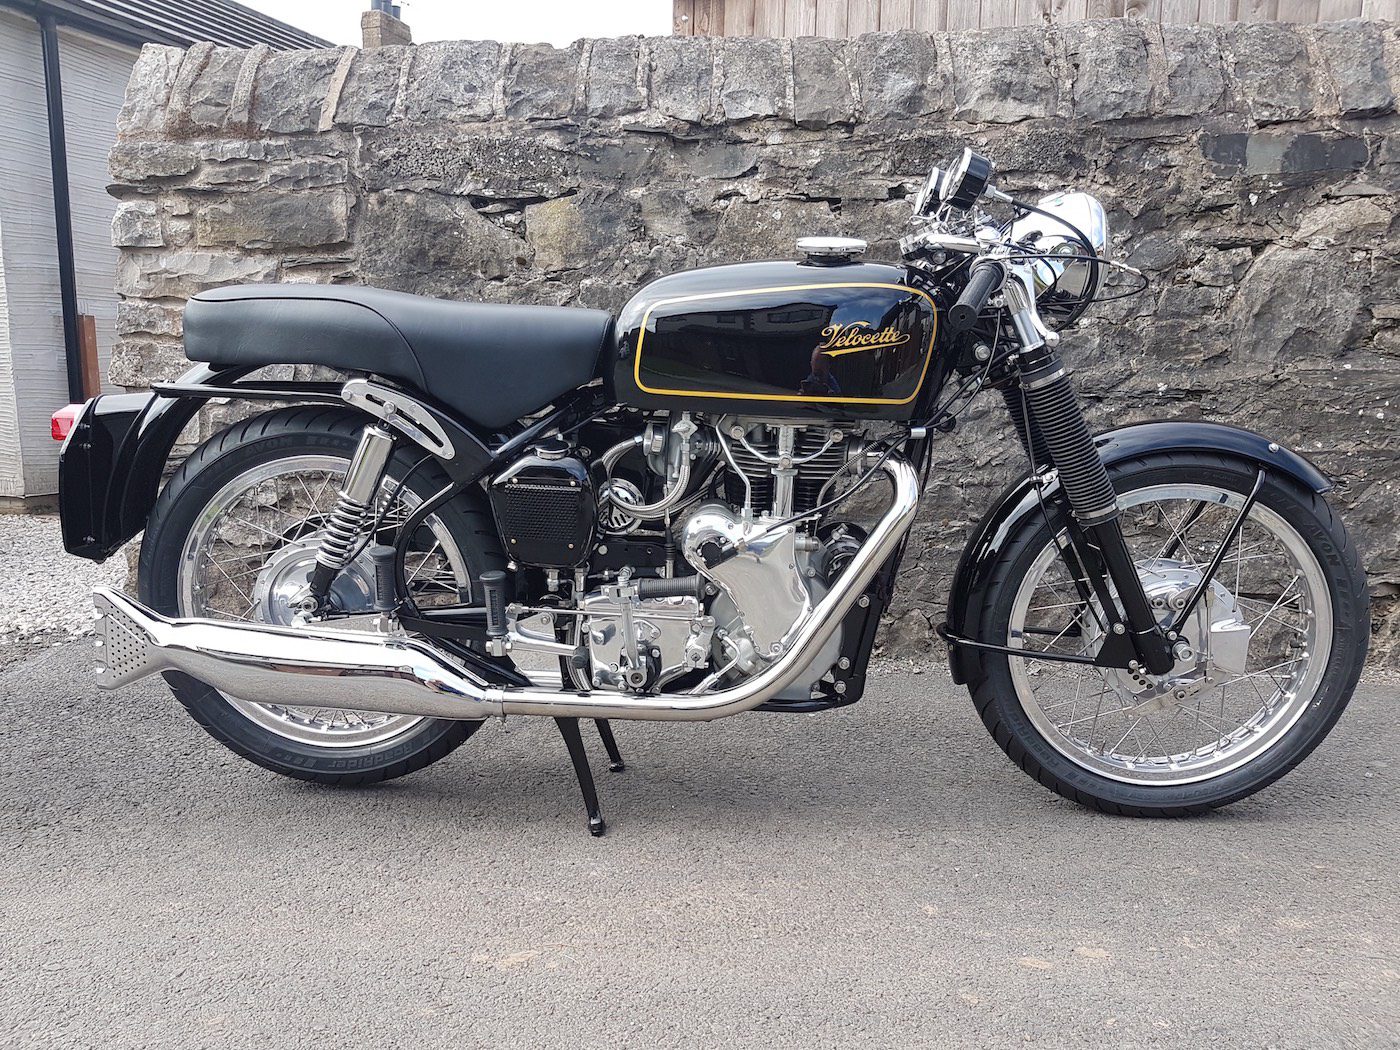 a Velocette Venom Clubman motorcycle from the 1960s